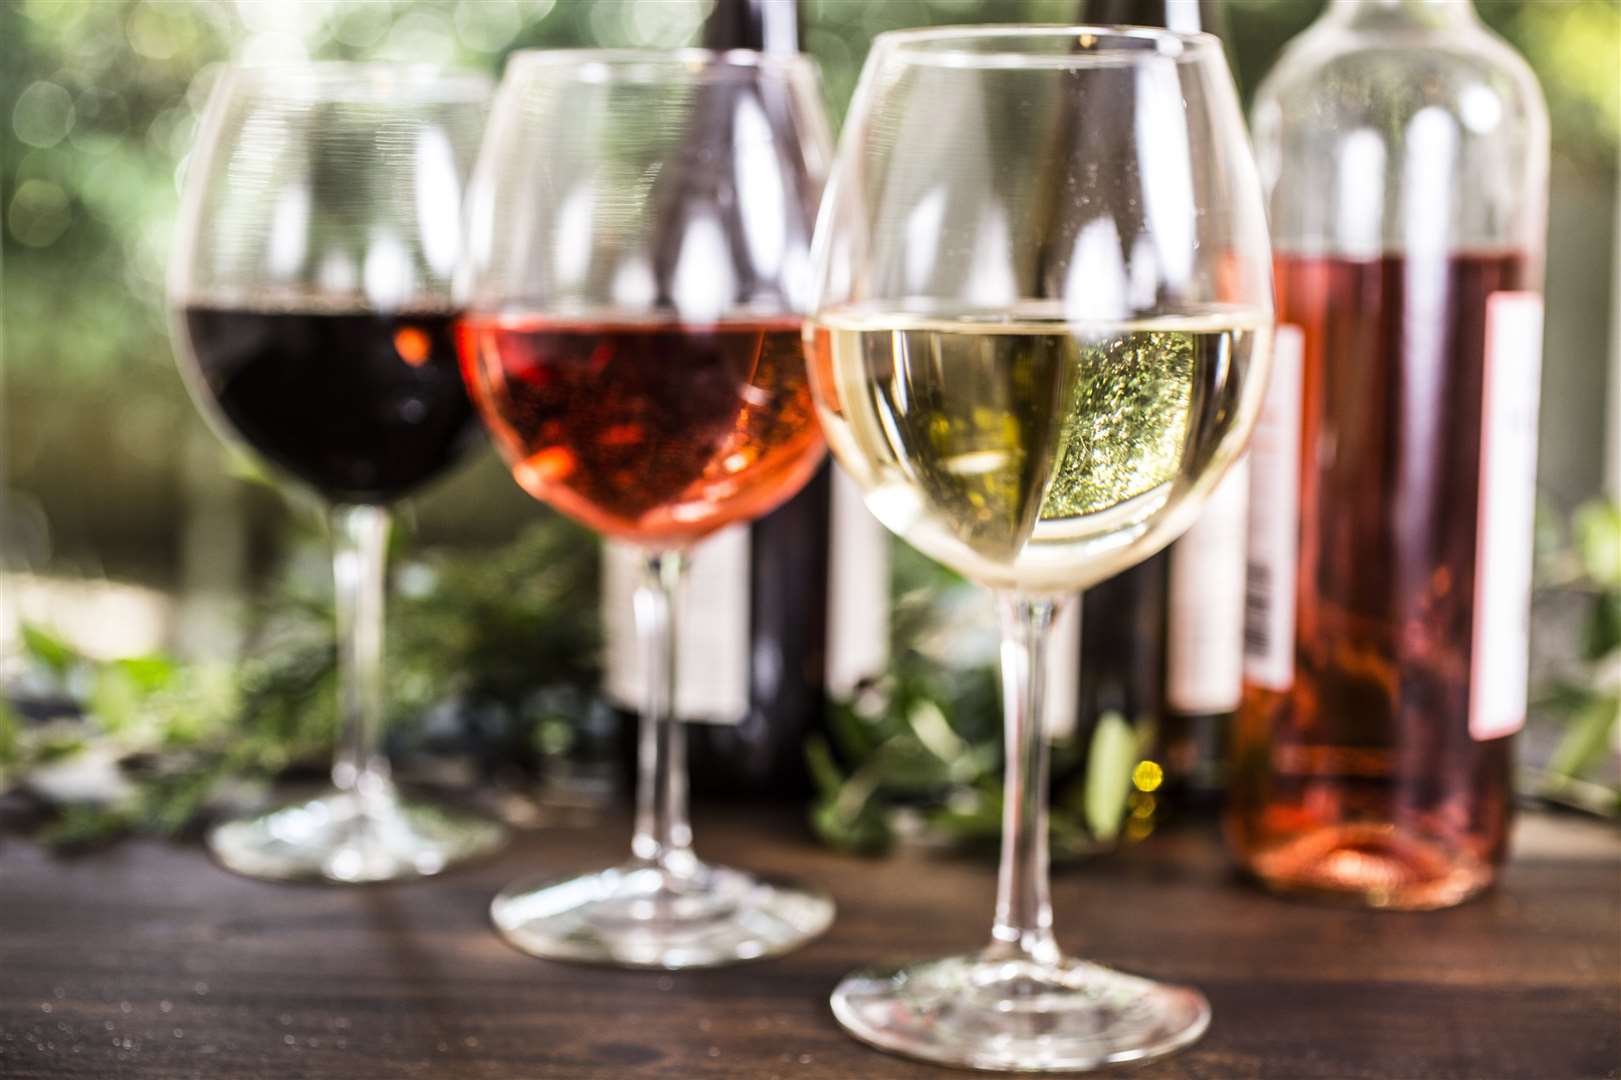 There will be a wide selection of wines on offer at the second Wine Garden of England Festival